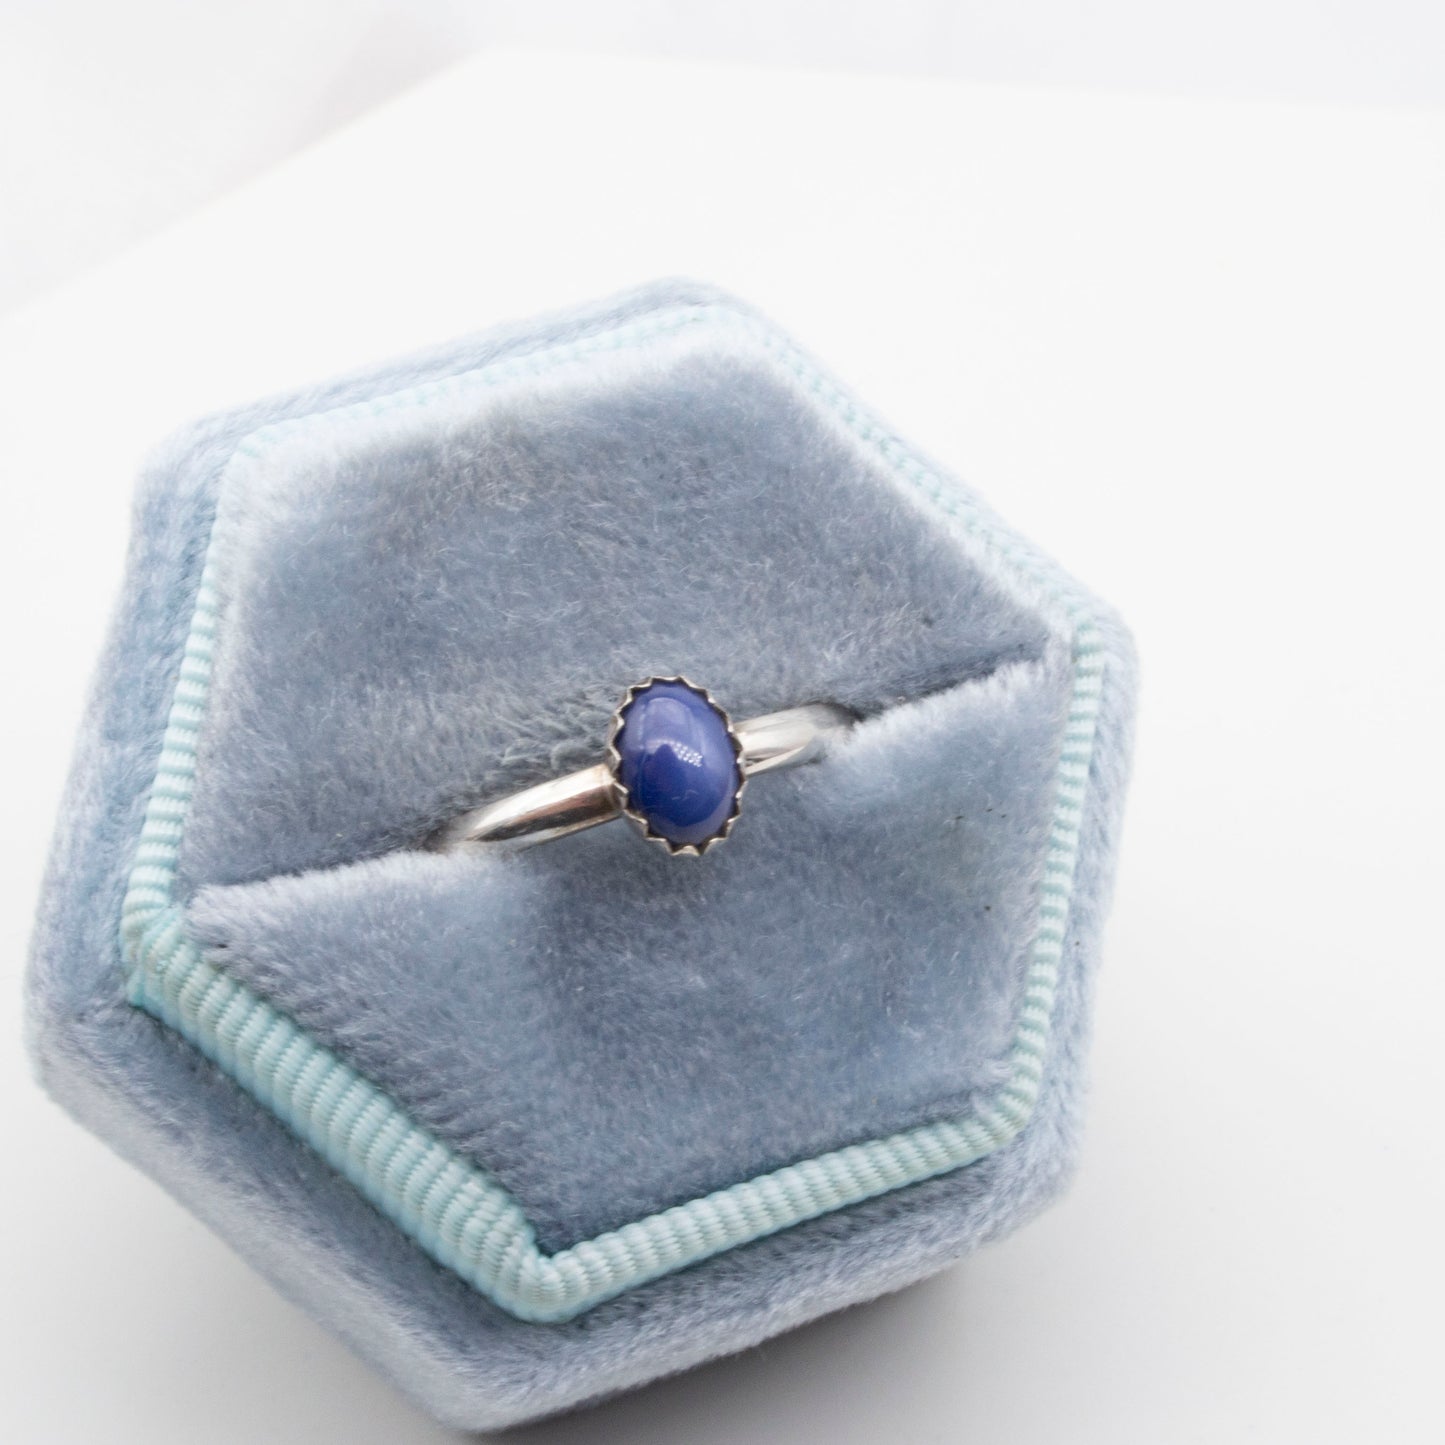 Synth star sapphire cabochon ring size Q1/2